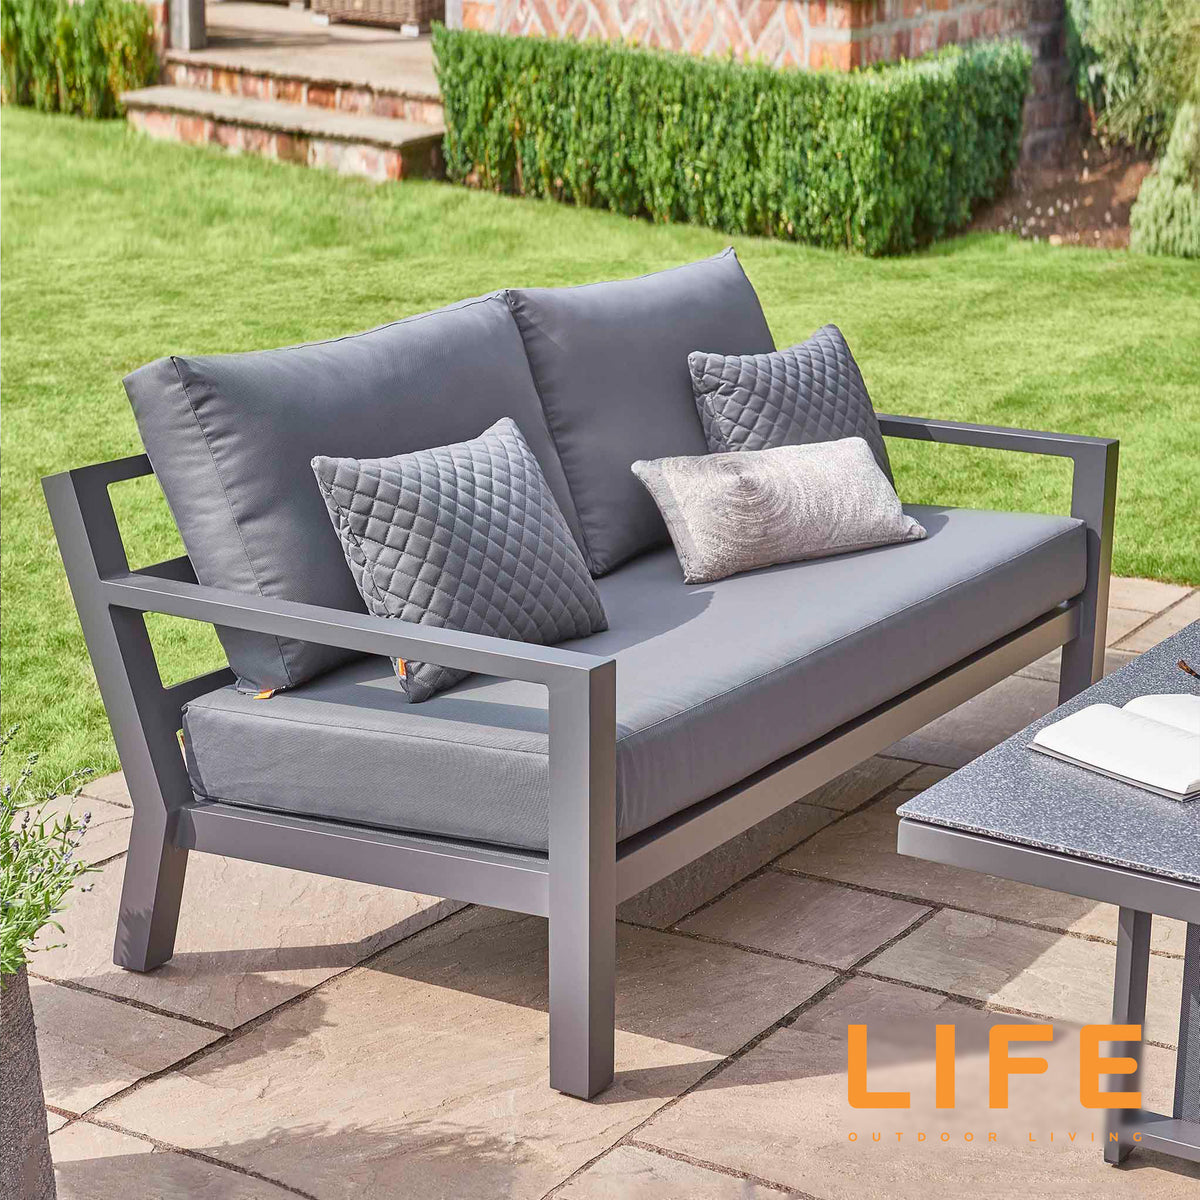 LIFE Timber Lounge Sofa with Height Adjustable Table Furniture